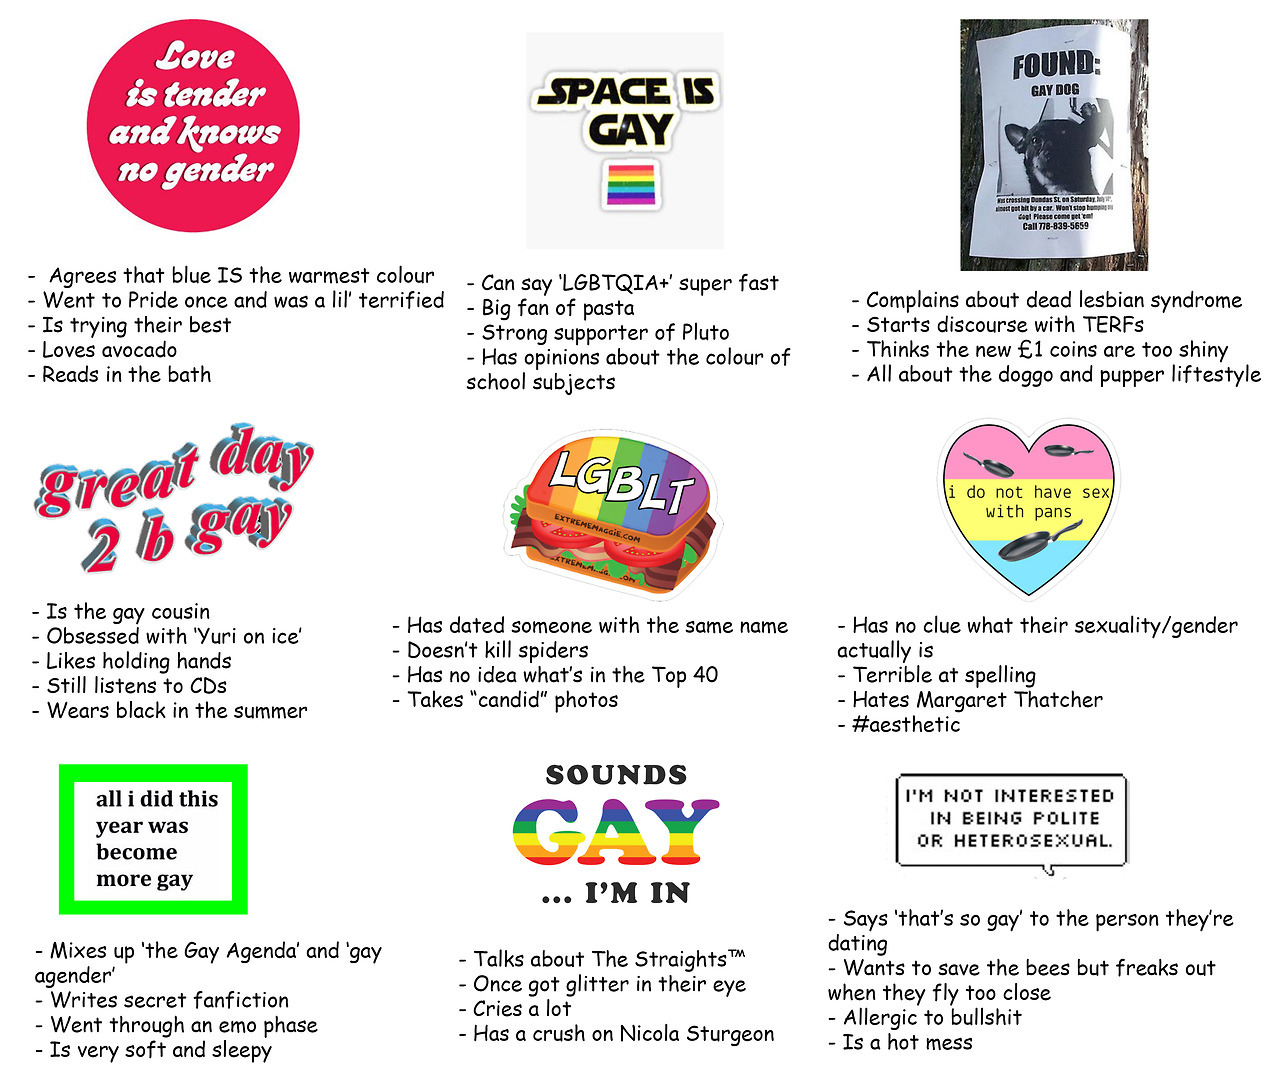 inspire-me-to-breathe:
“Tag urself I’m Found: Gay Dog
”
The first one